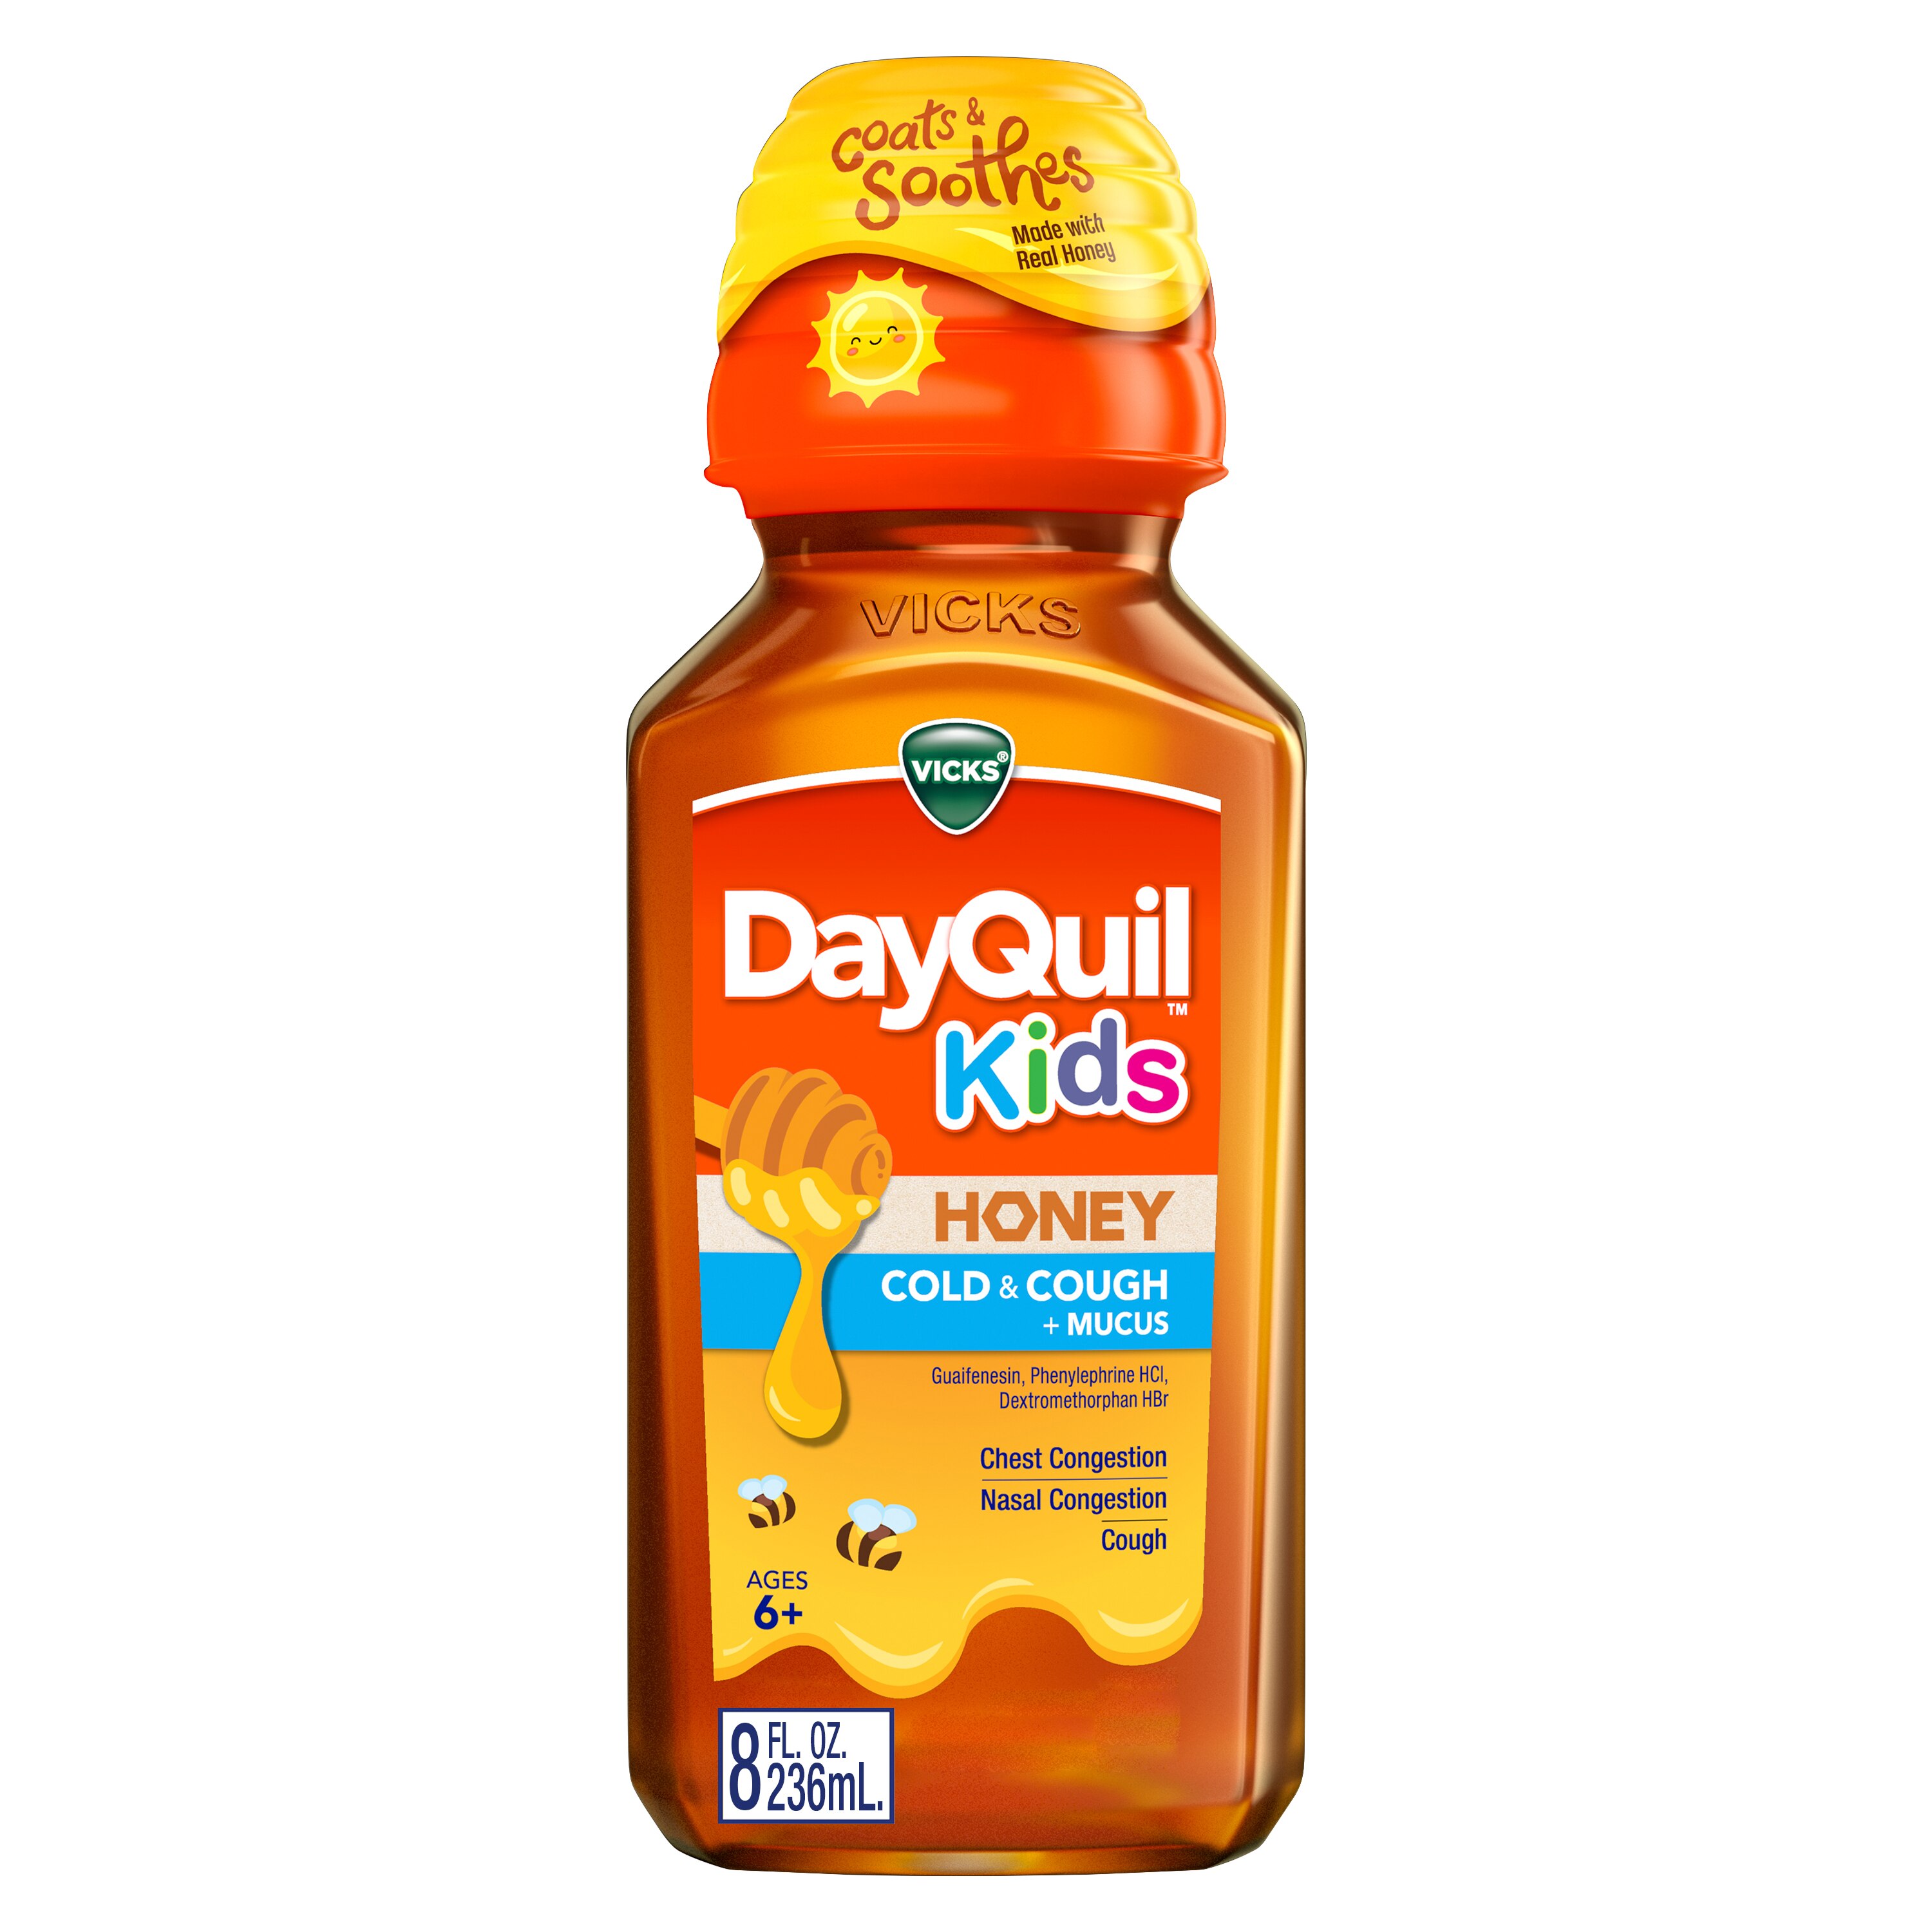 Vicks DayQuil Kids Cold and Cough + Mucus Relief Made With Real Honey For Kids 6+, 8 OZ